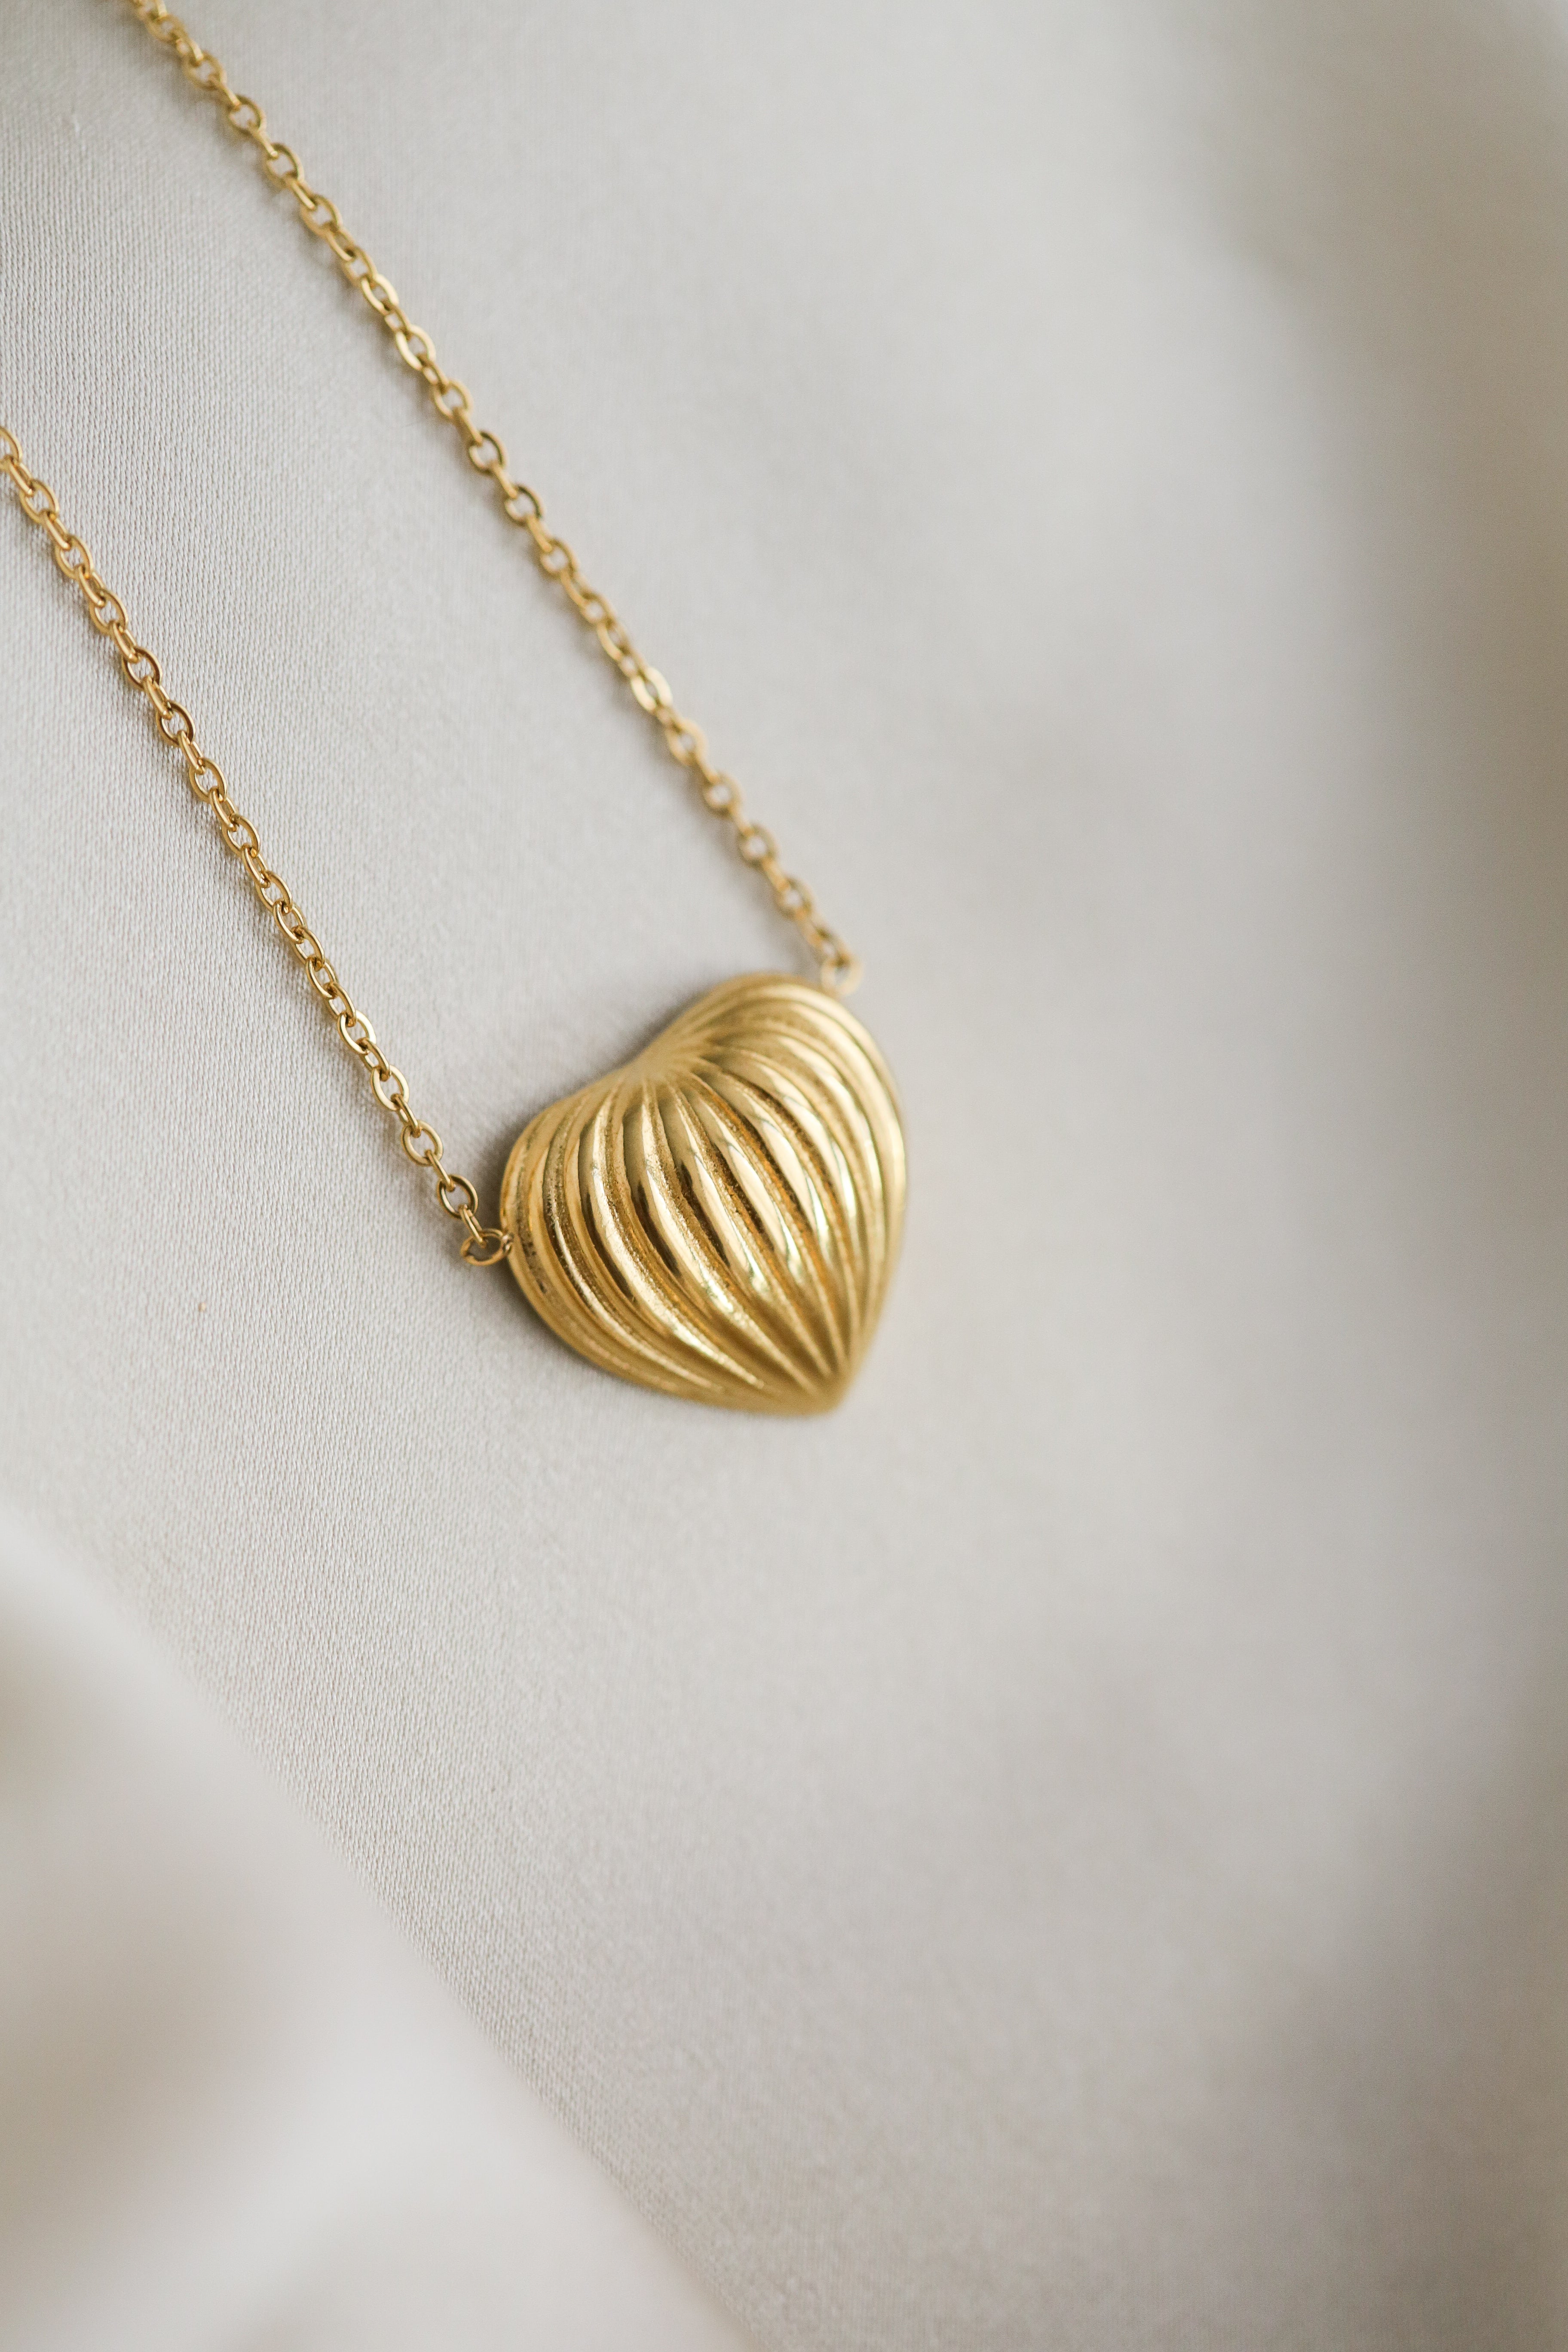 The Heart - Ribbed Pendant Necklace